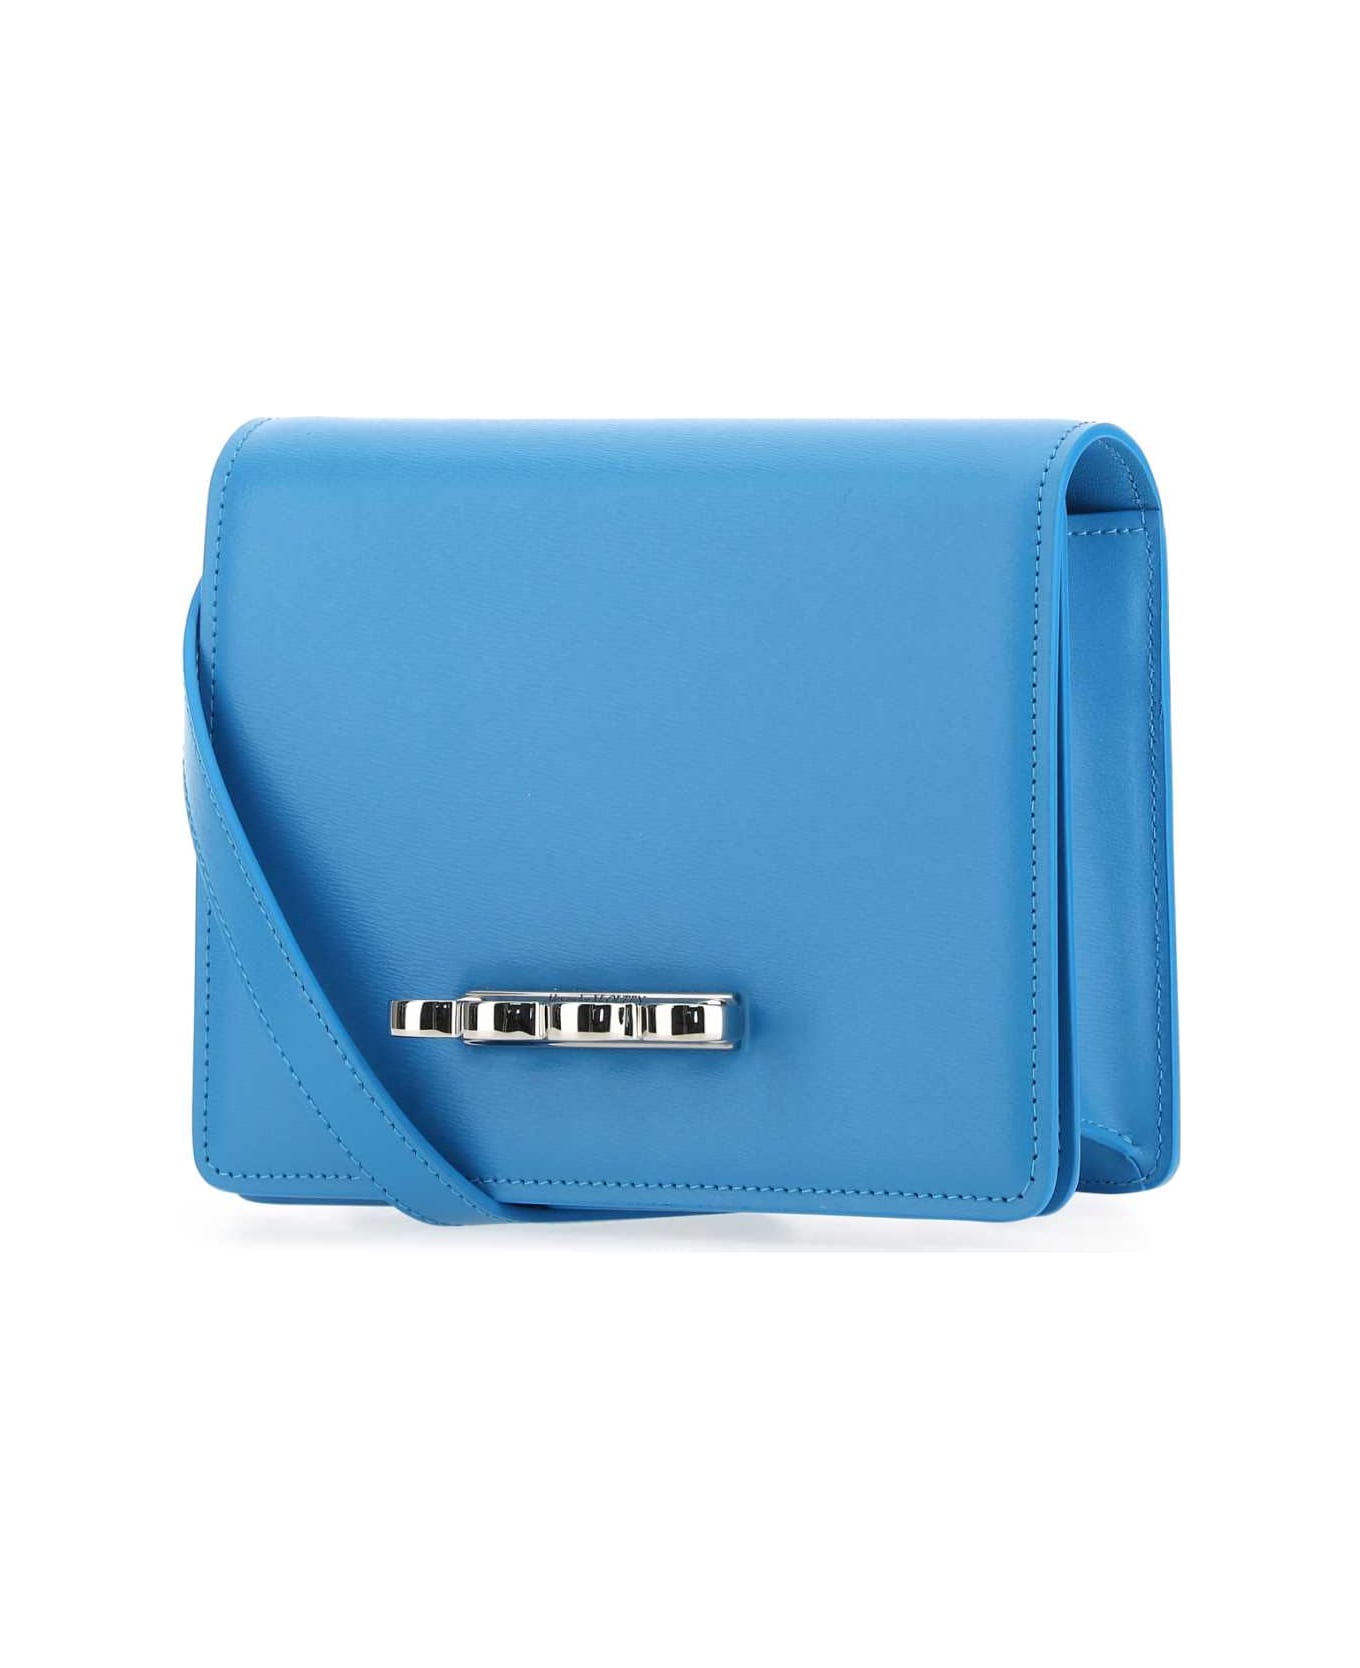 Alexander McQueen Light-blue Leather The Four Ring Clutch - 4722